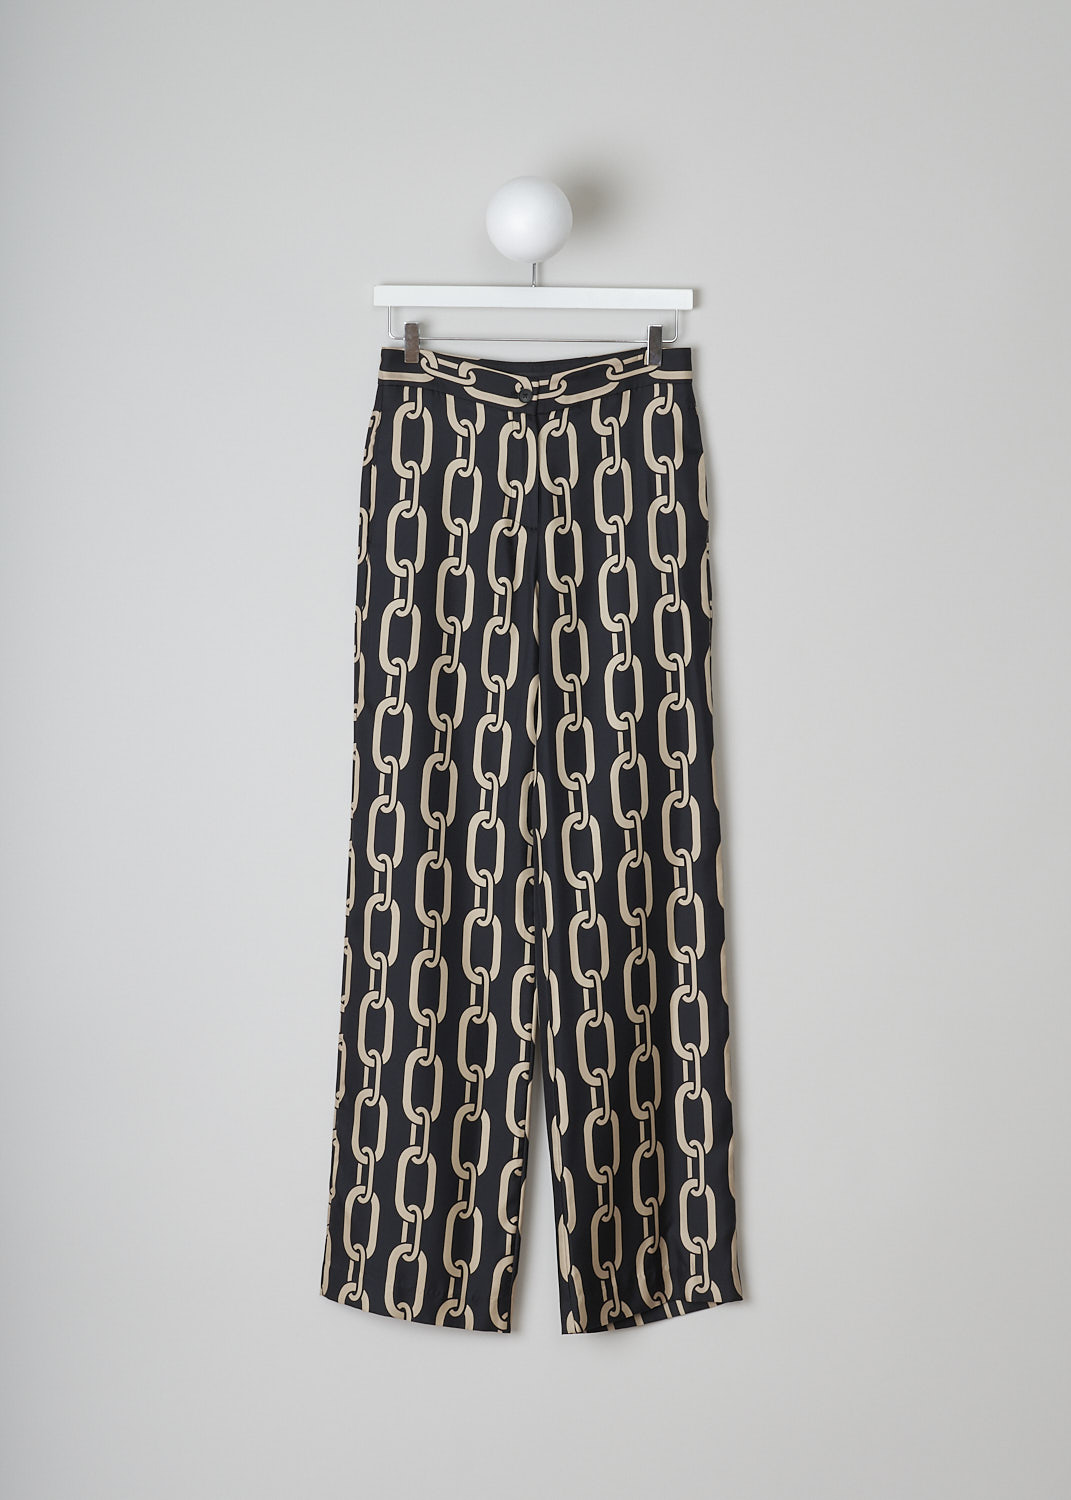 NILI LOTAN, SILK GERMAINE PANTS WITH CHAINLINK PRINT, 12206_W856, Black, Gold, Print, Front, These silk Germaine pants have a black base with an all-over chainlink print in gold. These pants have a button and concealed zip closure. Slated pockets are concealed in the side seams and welt pockets can be found in the back. These pants are high-waisted with straight pant legs. 
  
